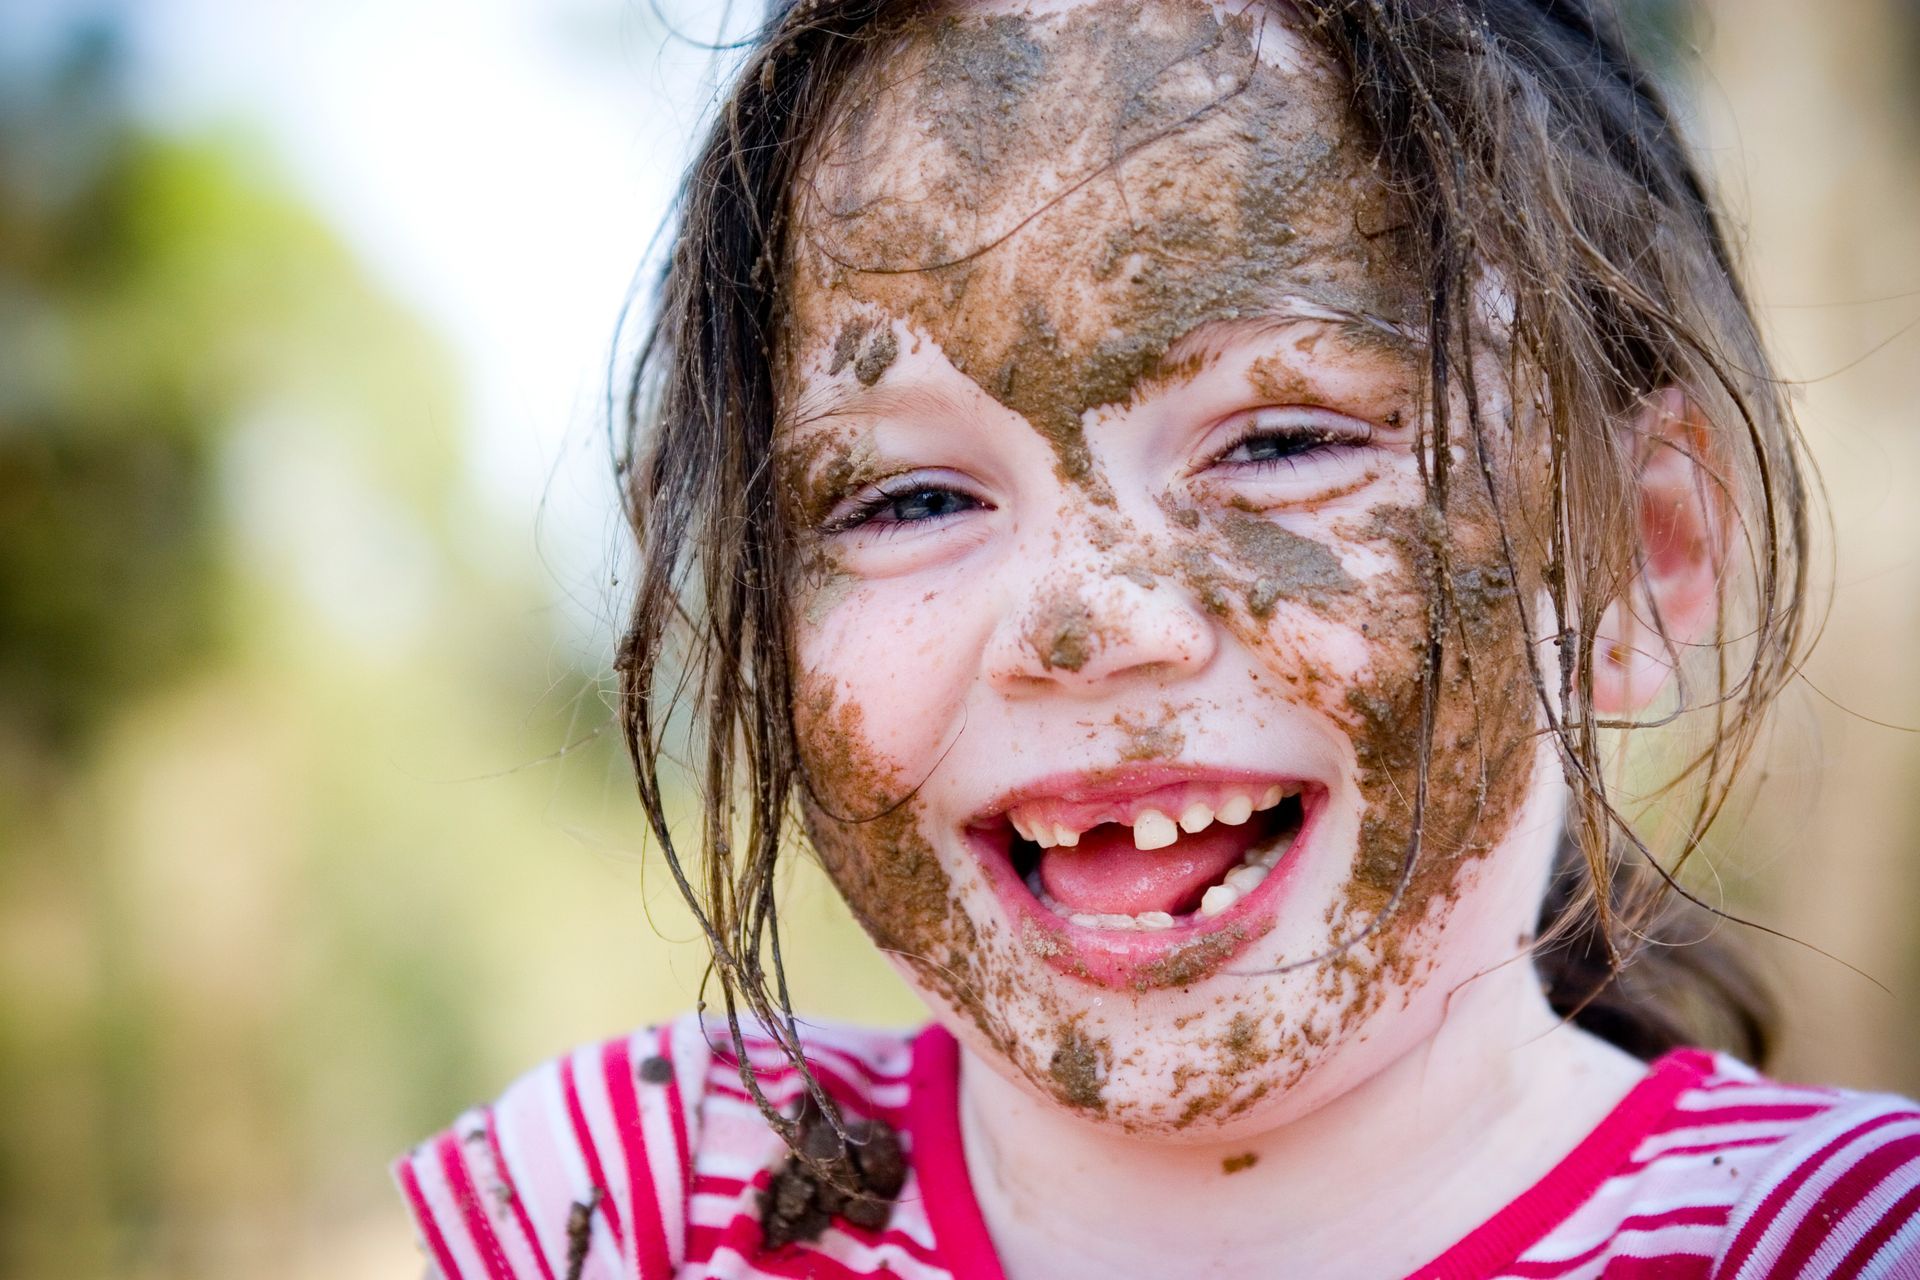 A little girl with mud on her face is smiling.